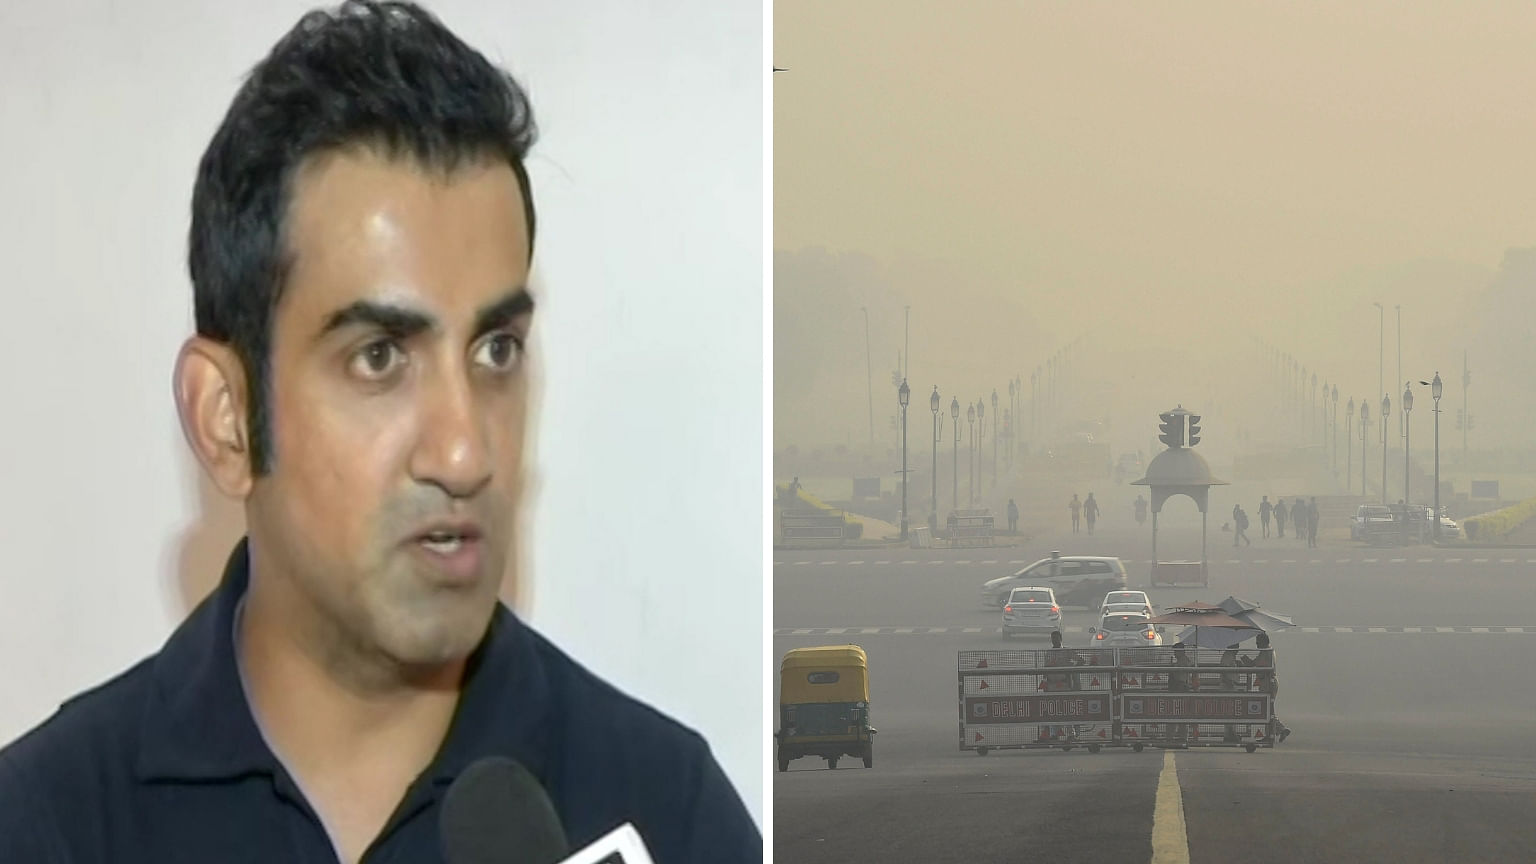 Gautam Gambhir speaks to the media about the air quality in New Delhi.